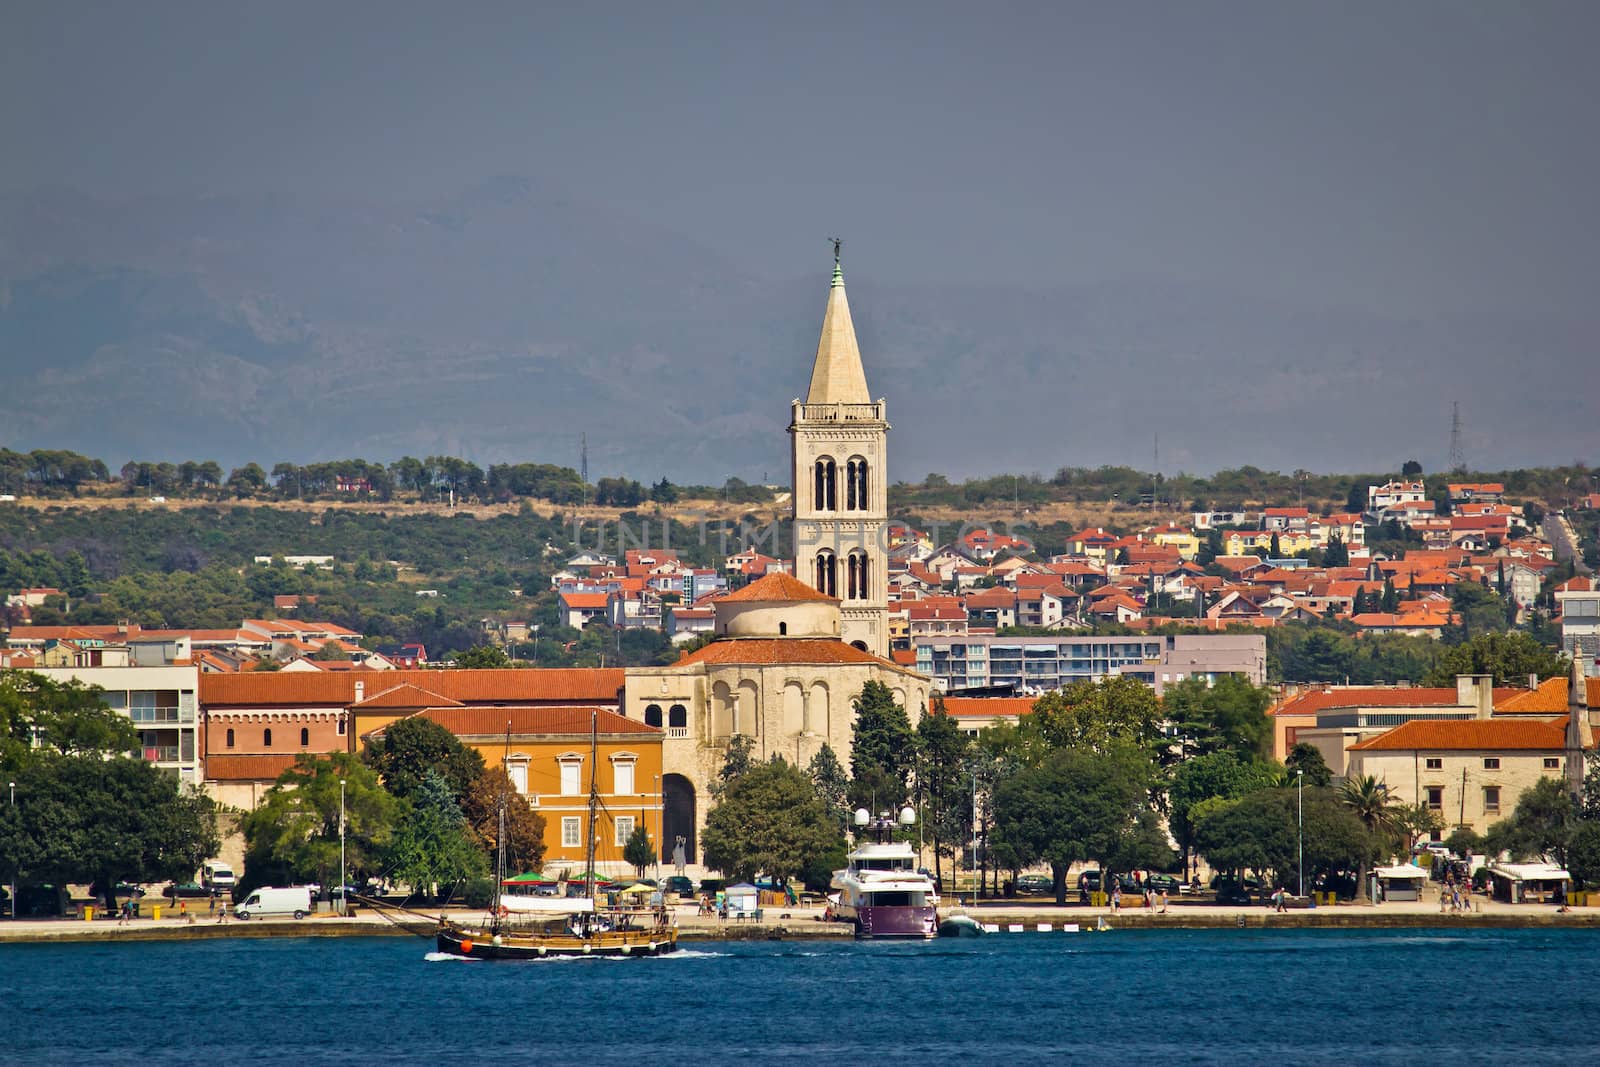 Zadar waterfront view from the sea by xbrchx